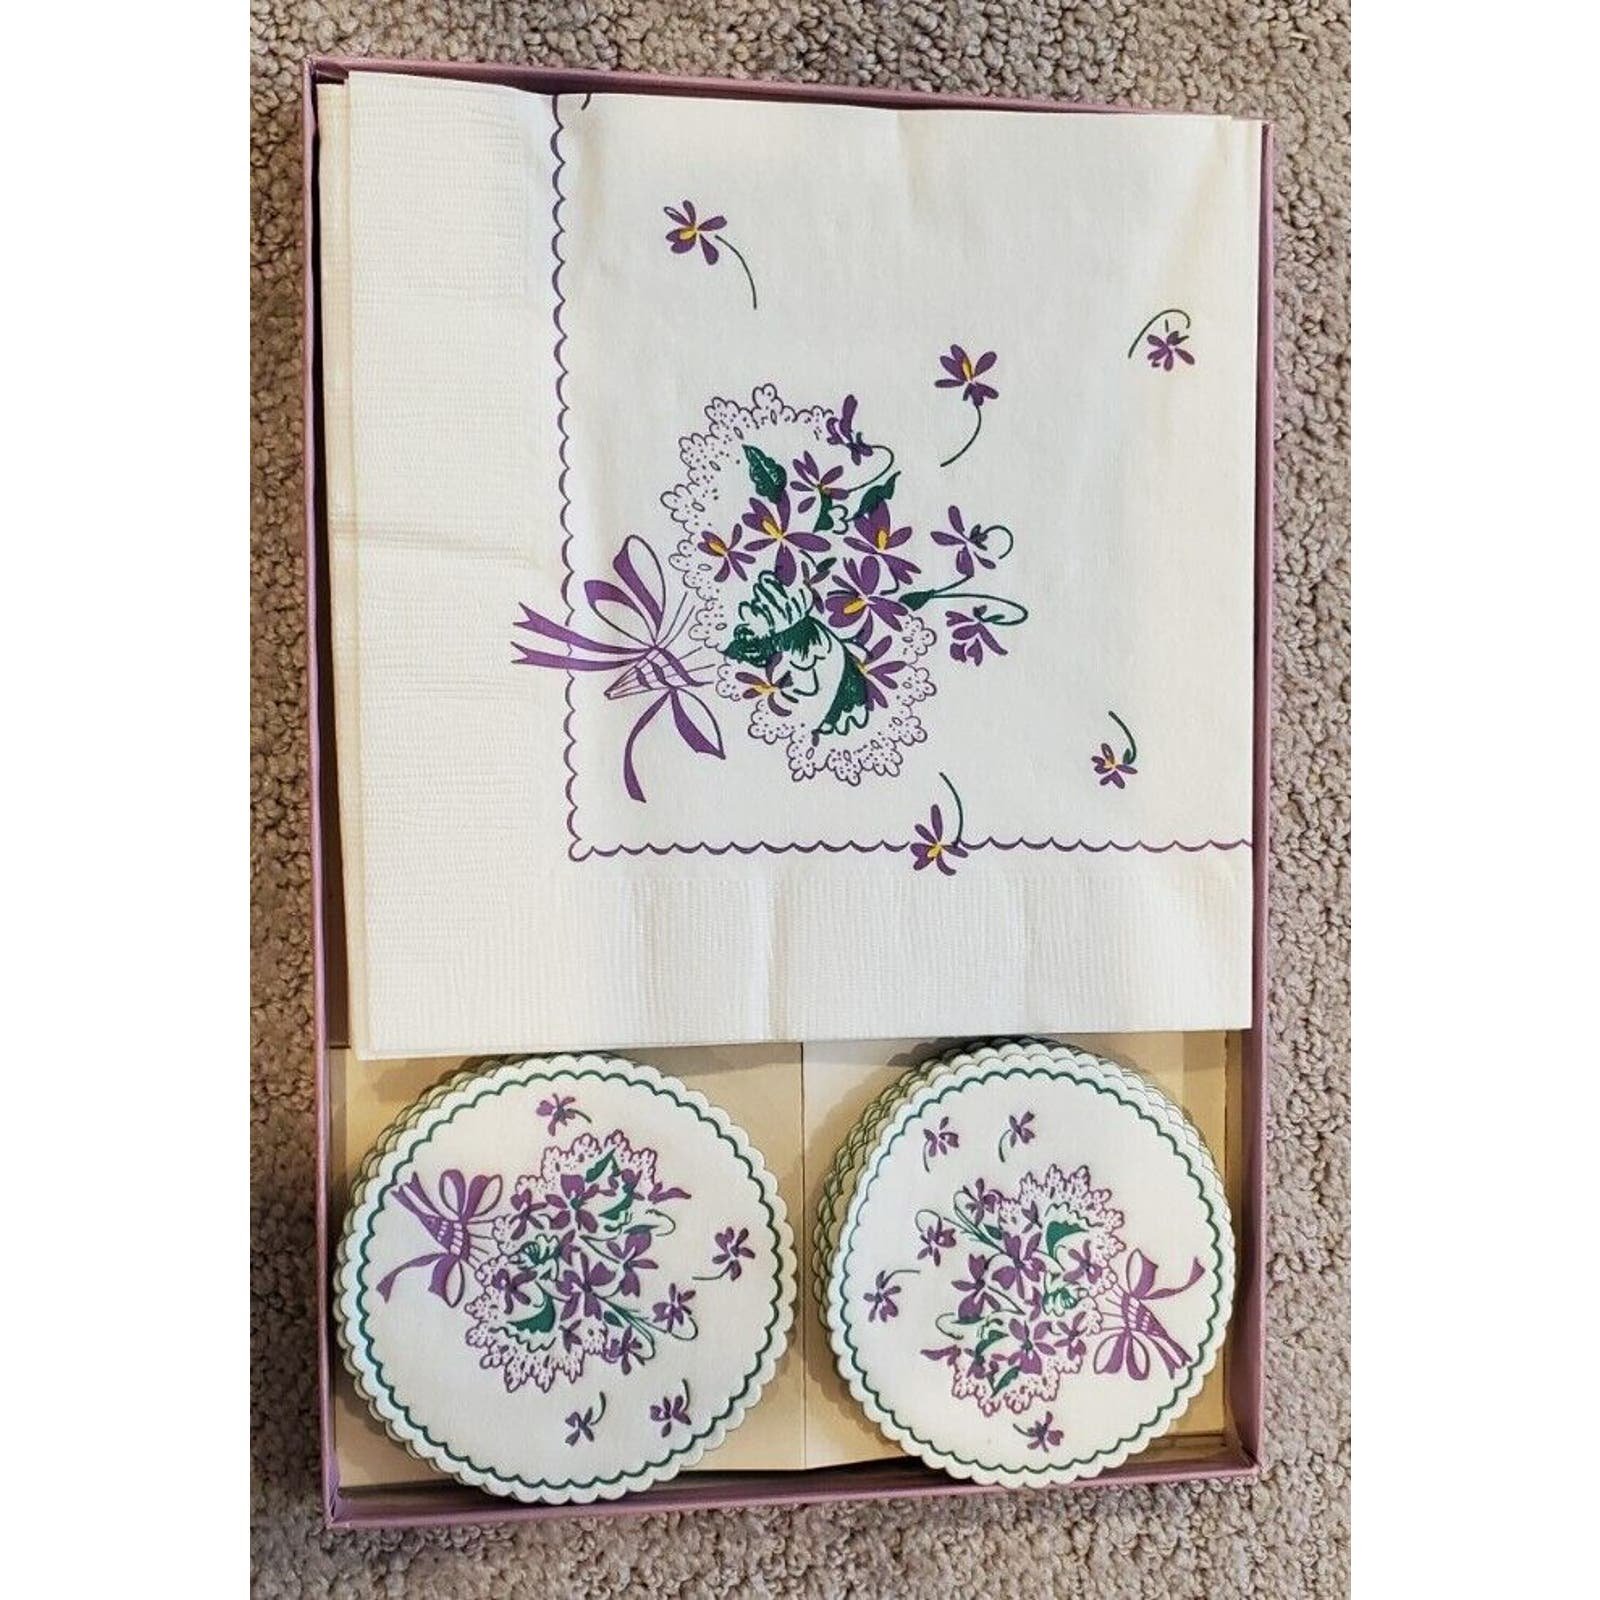 Vintage Made in USA Dainty Violets Hostess Luncheon Ensemble Napkins Coasters MSvCLu6Jz